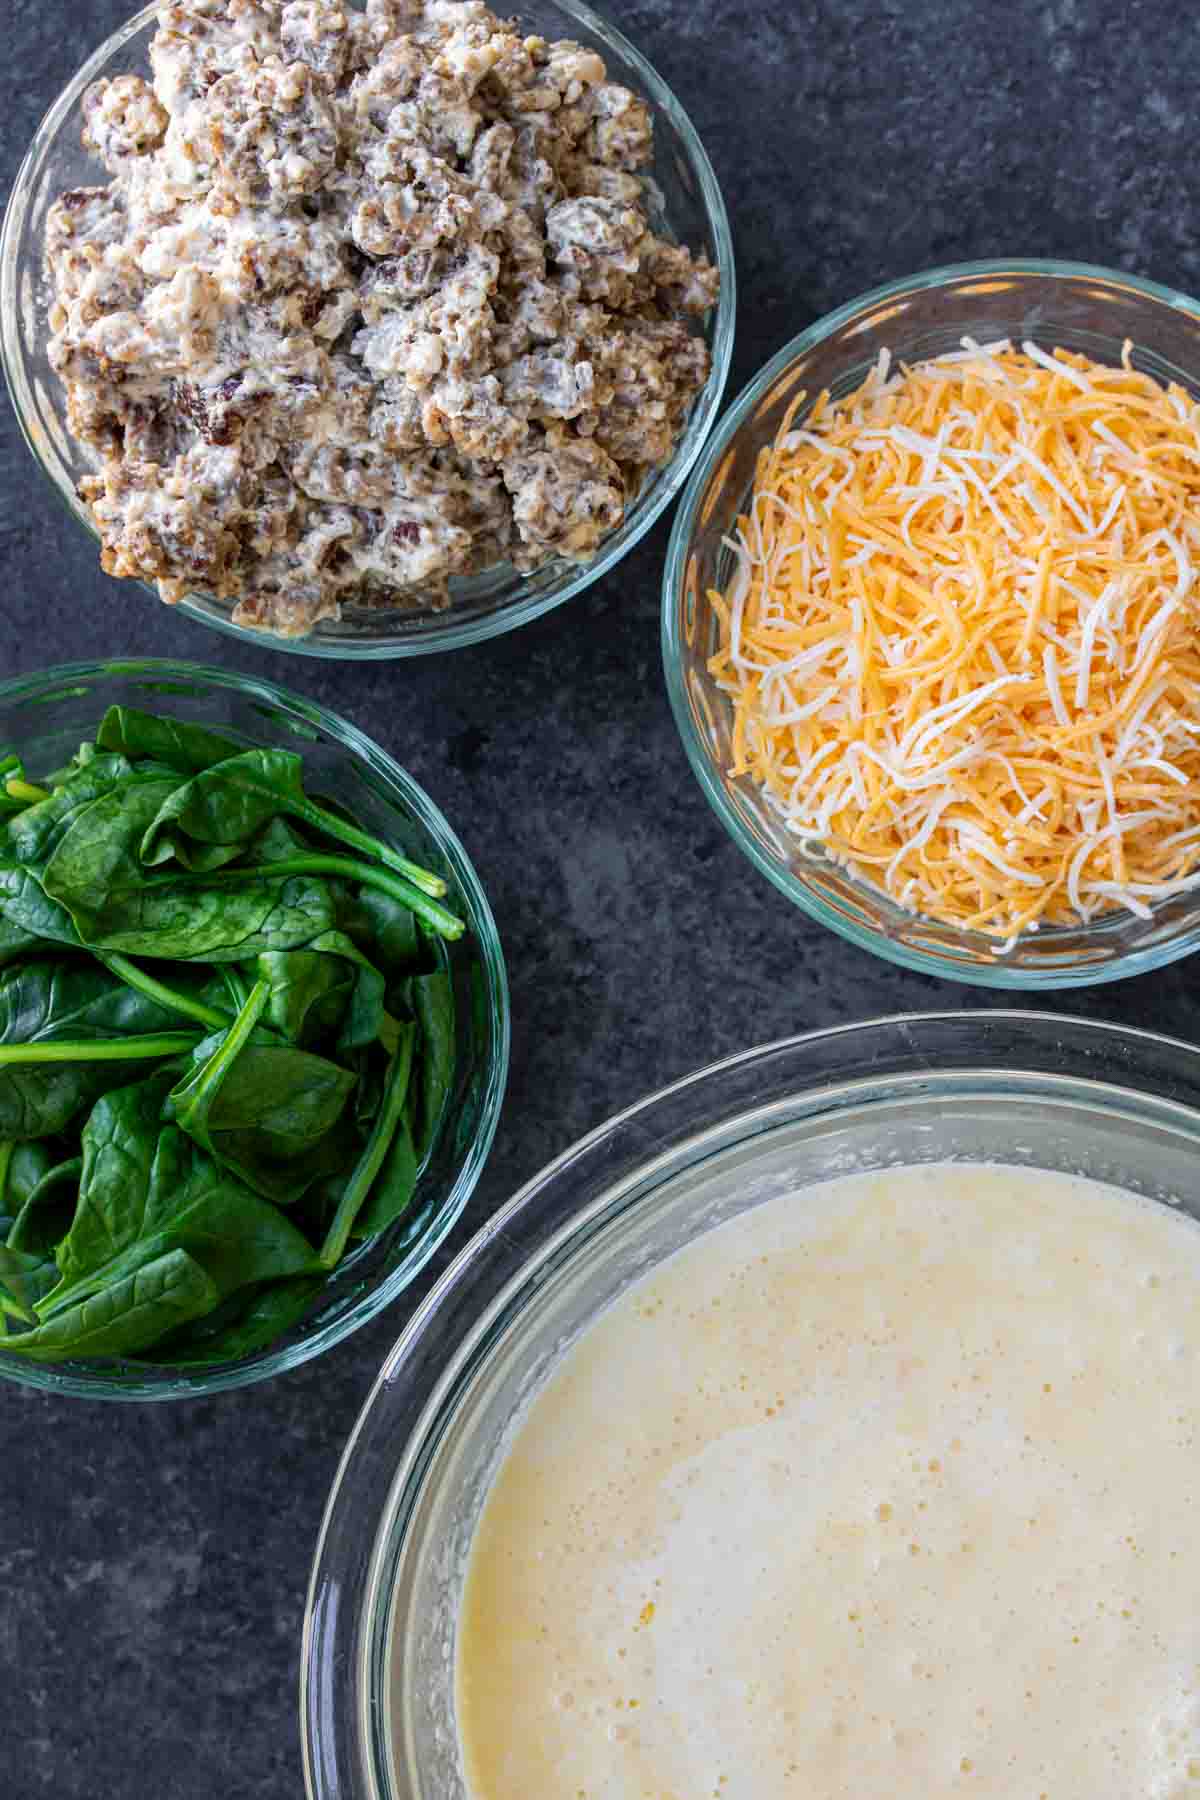 Ingredients for a recipe arranged on a countertop, including a bowl of seasoned ground meat, shredded cheese, fresh spinach, and a eggs for Spinach and Sausage Quiche